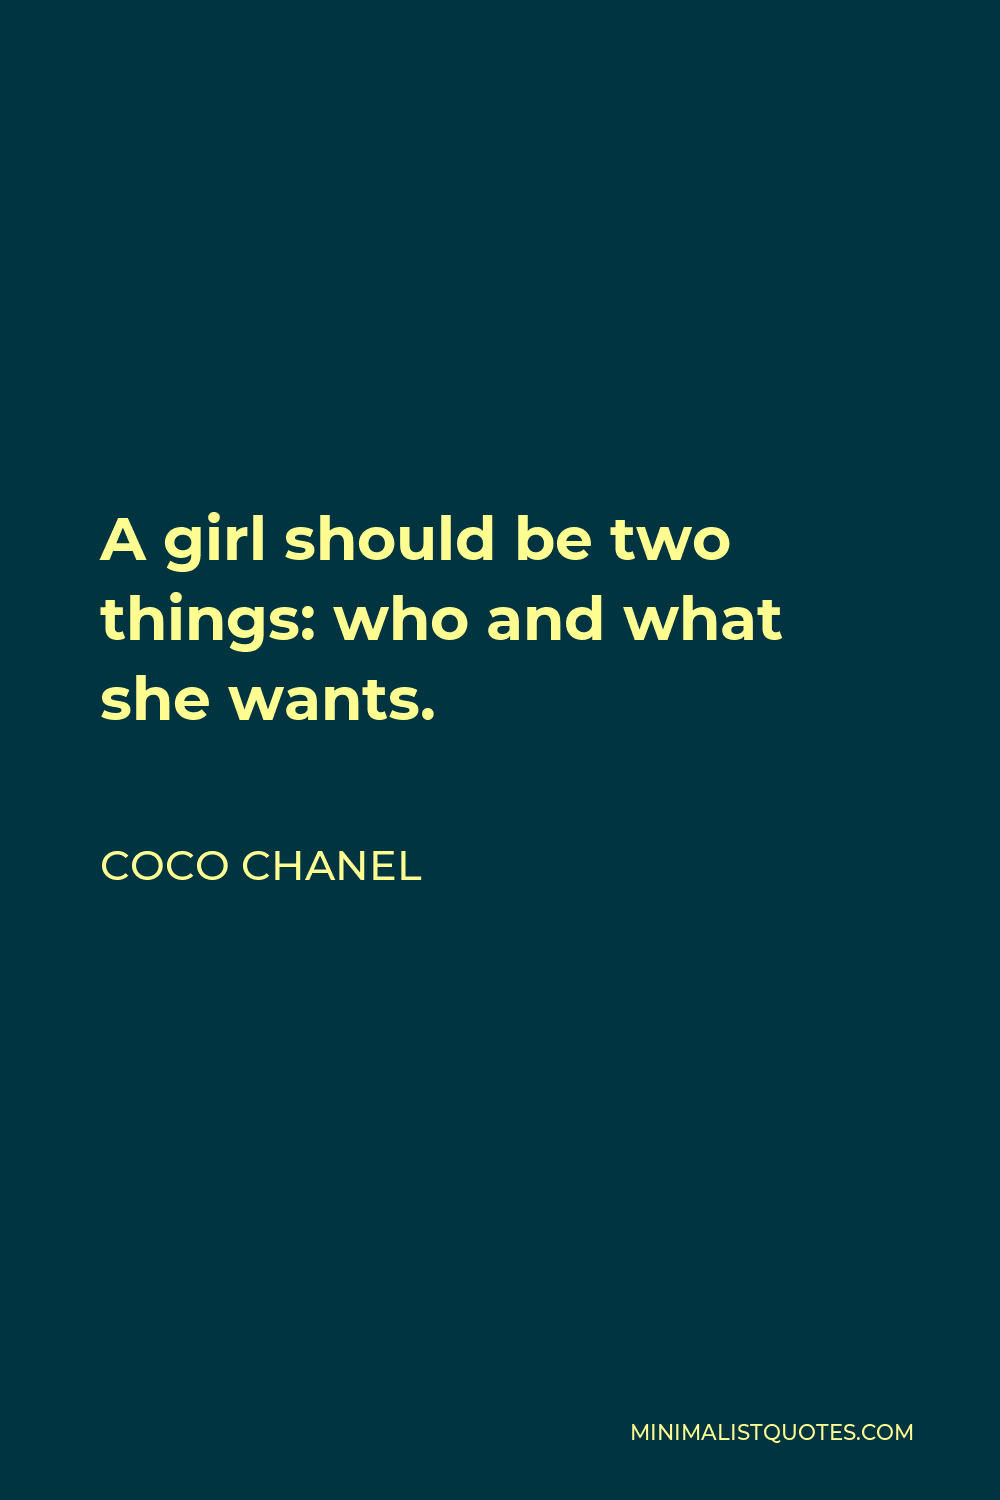 Coco Chanel Quote - A girl should be two things: who and what she wants.